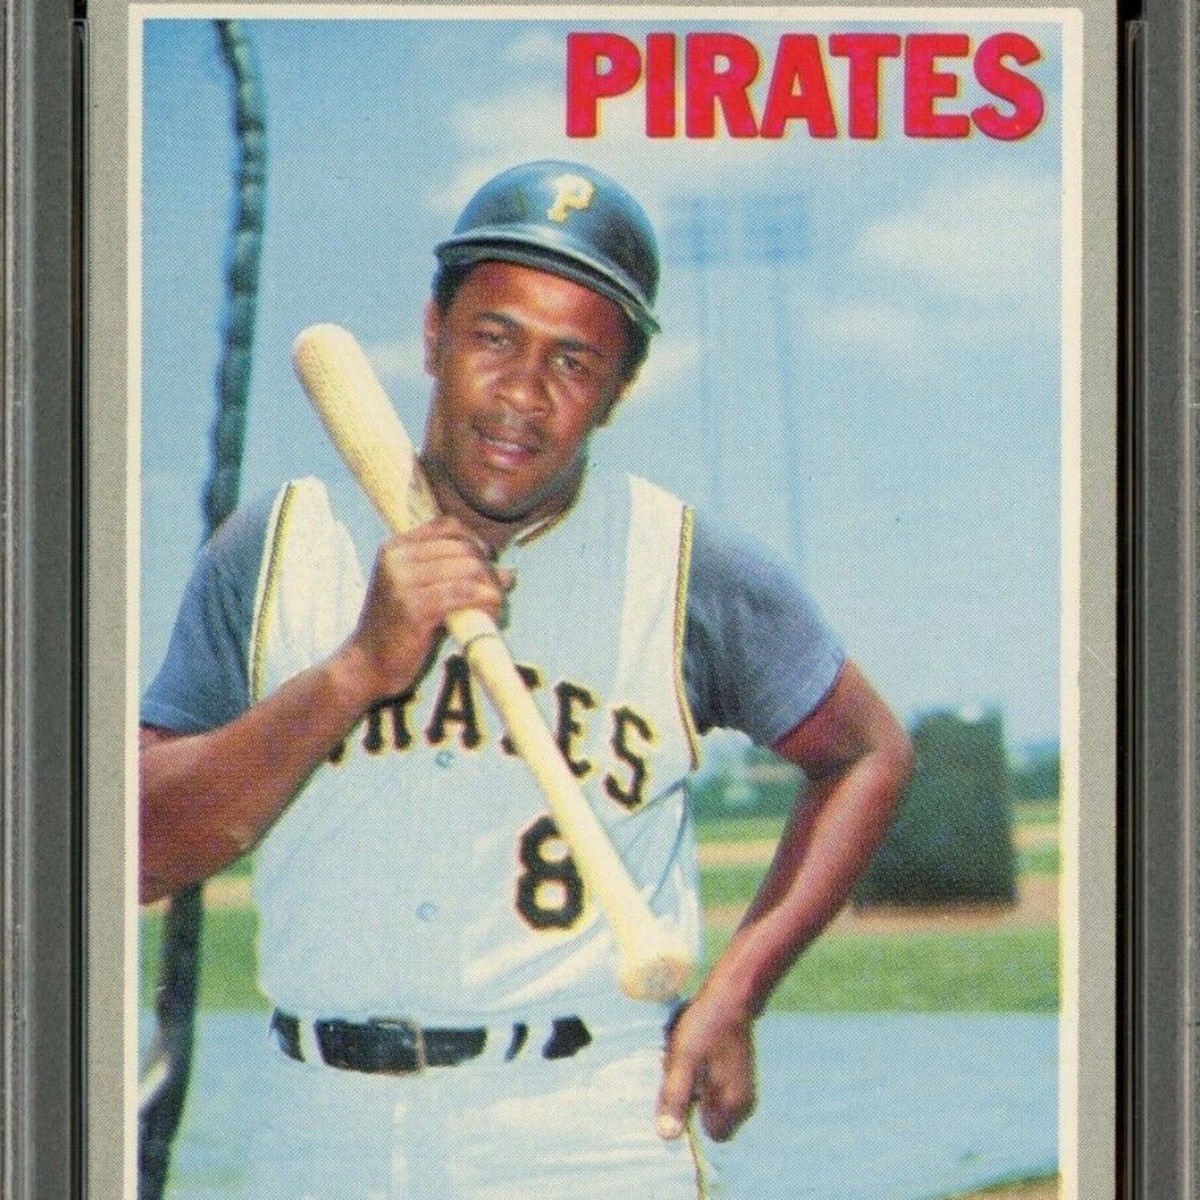 willie stargell,Cards,Top Selling Cards,Willie Horton.